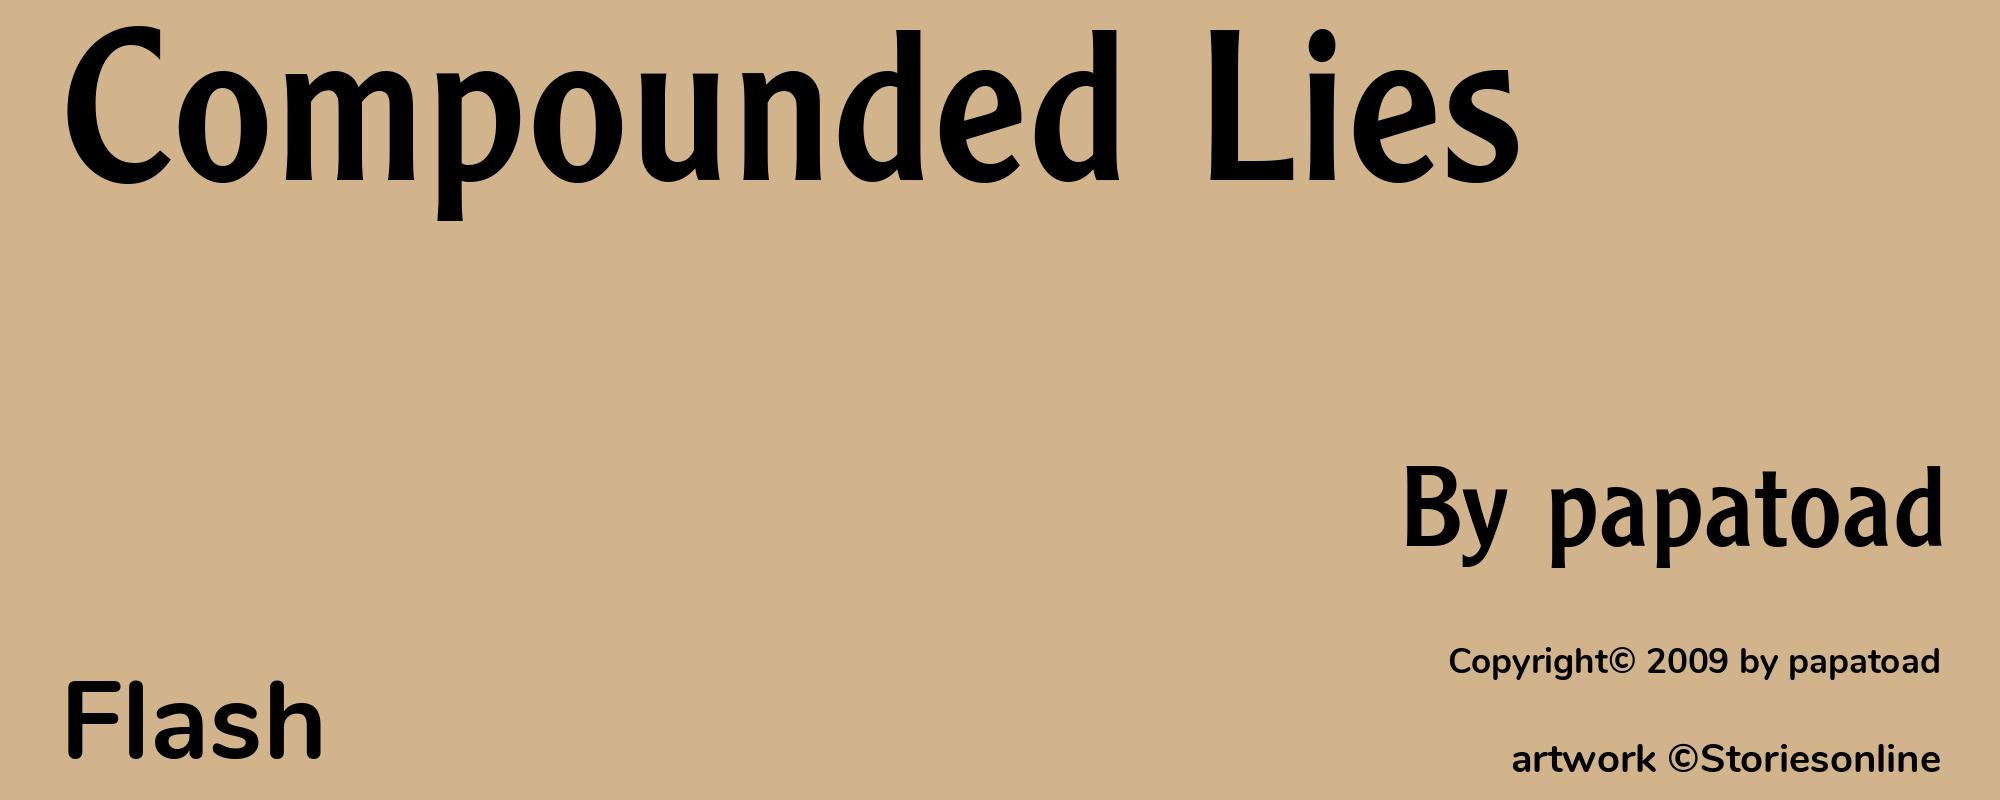 Compounded Lies - Cover